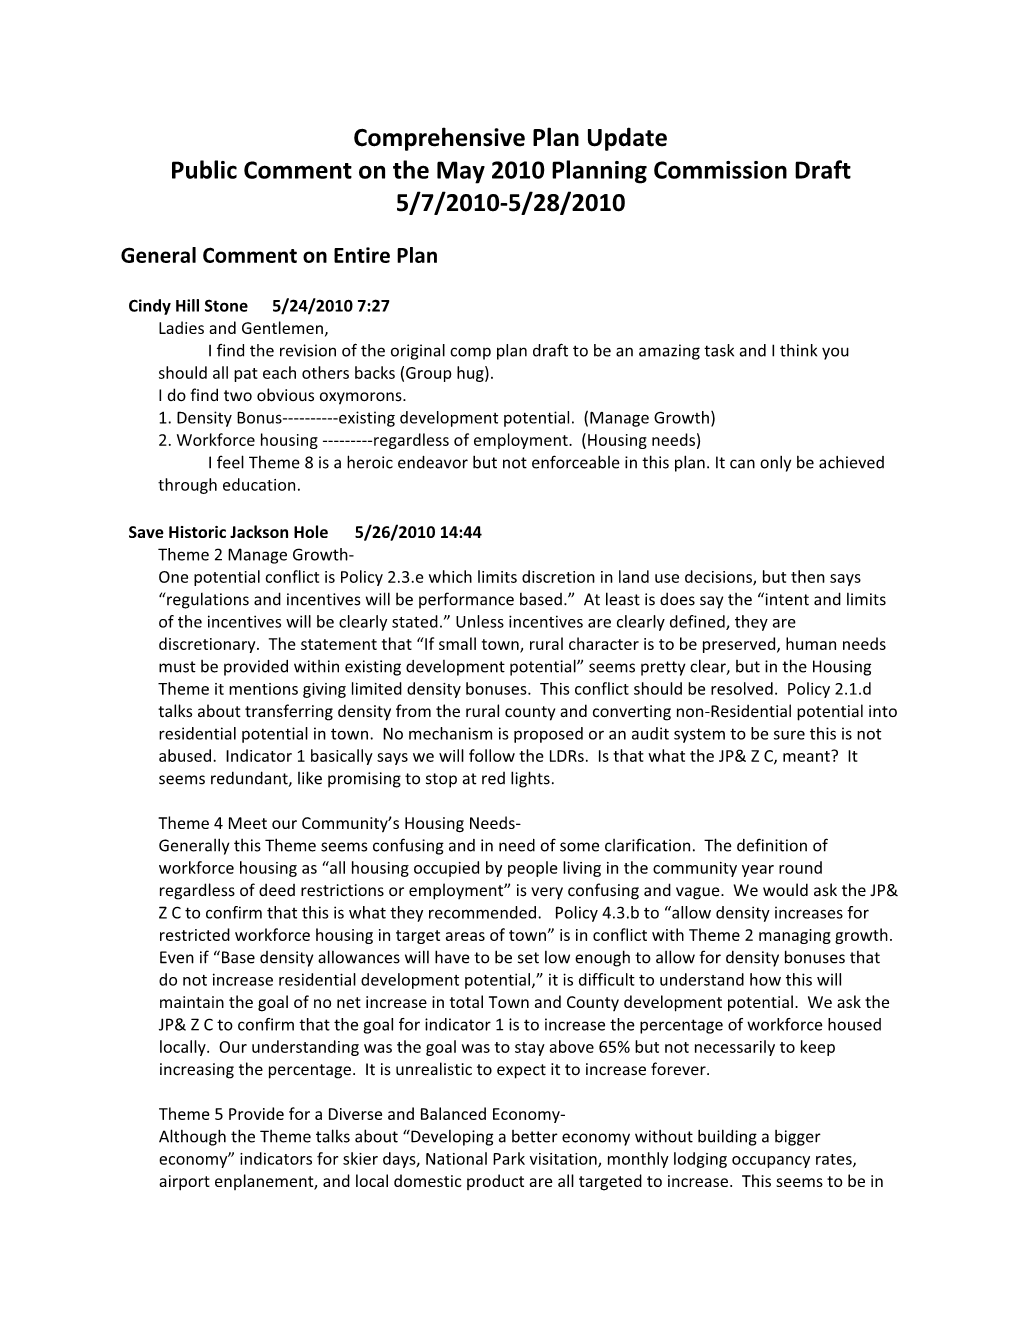 Comprehensive Plan Update Public Comment on the May 2010